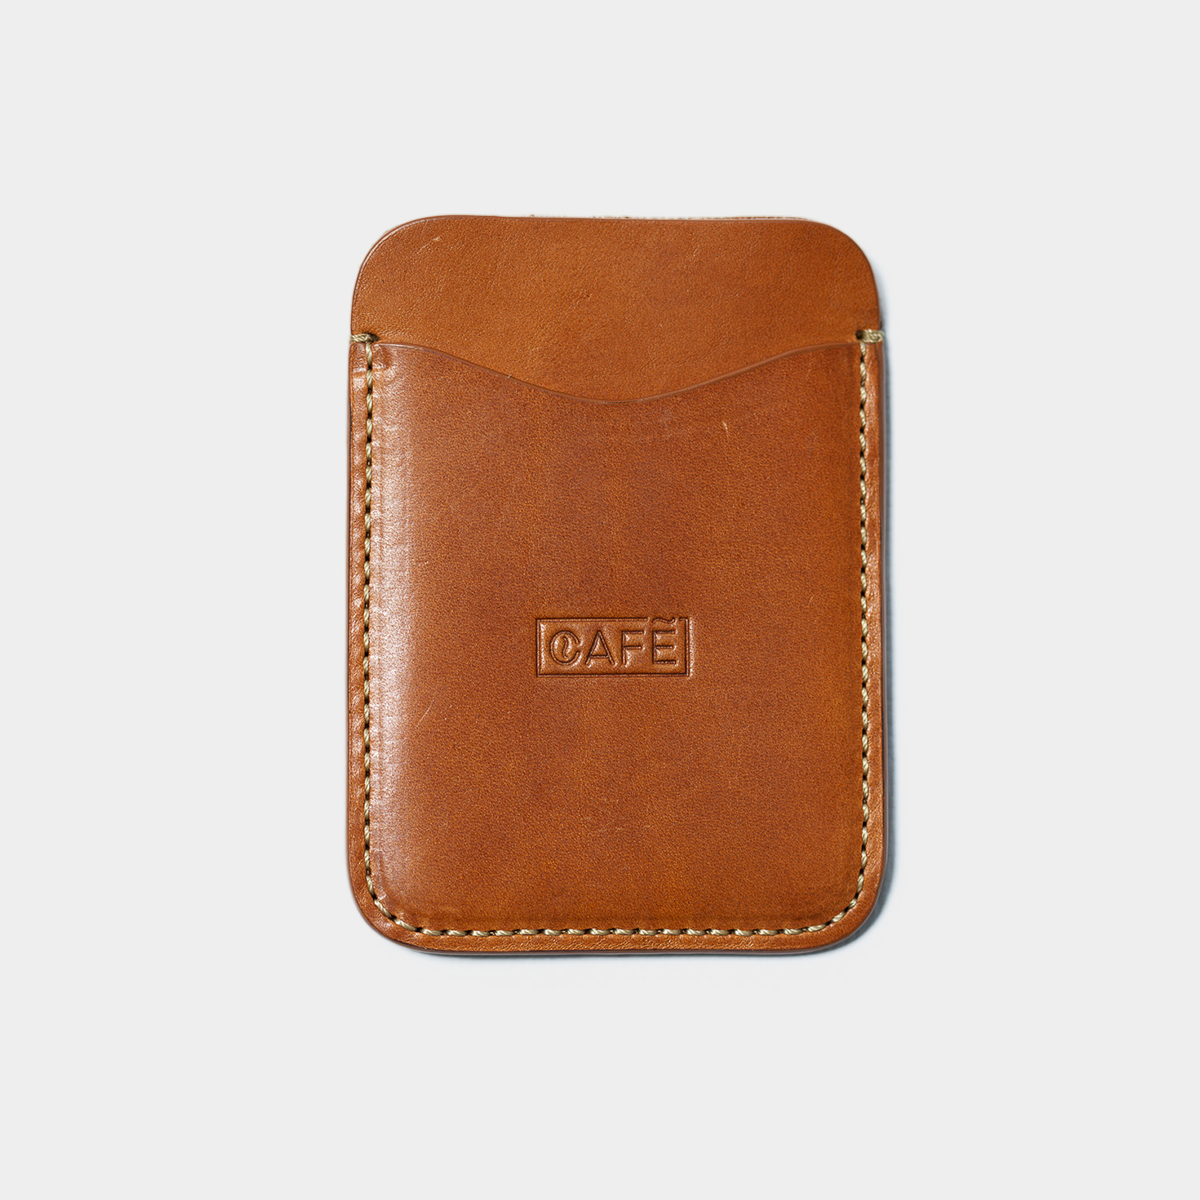 leather card holder roasted front